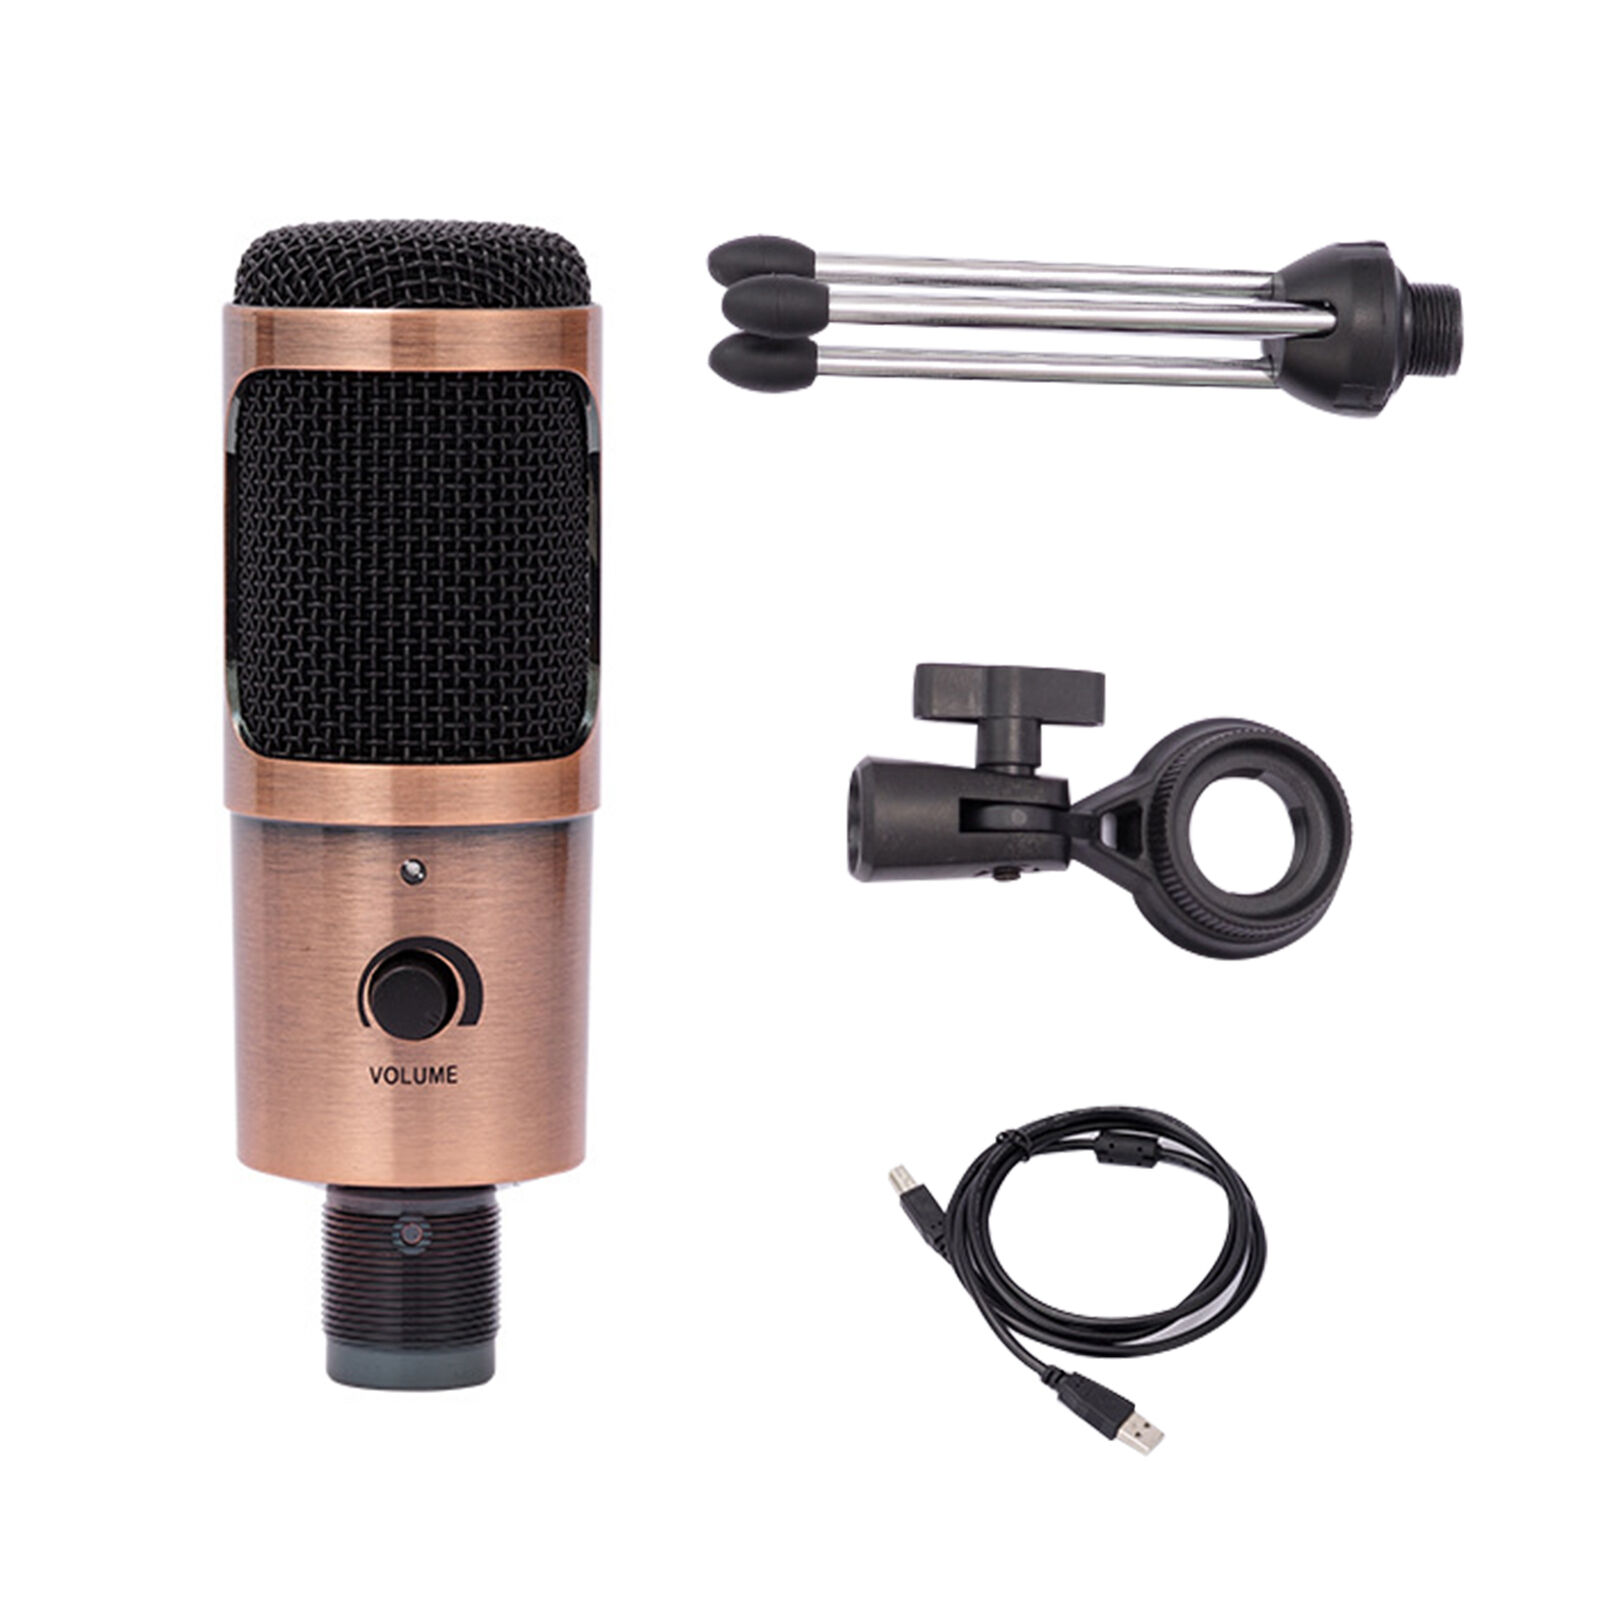 Usb Microphone Reliable Handheld Professional Usb Microphone Compact